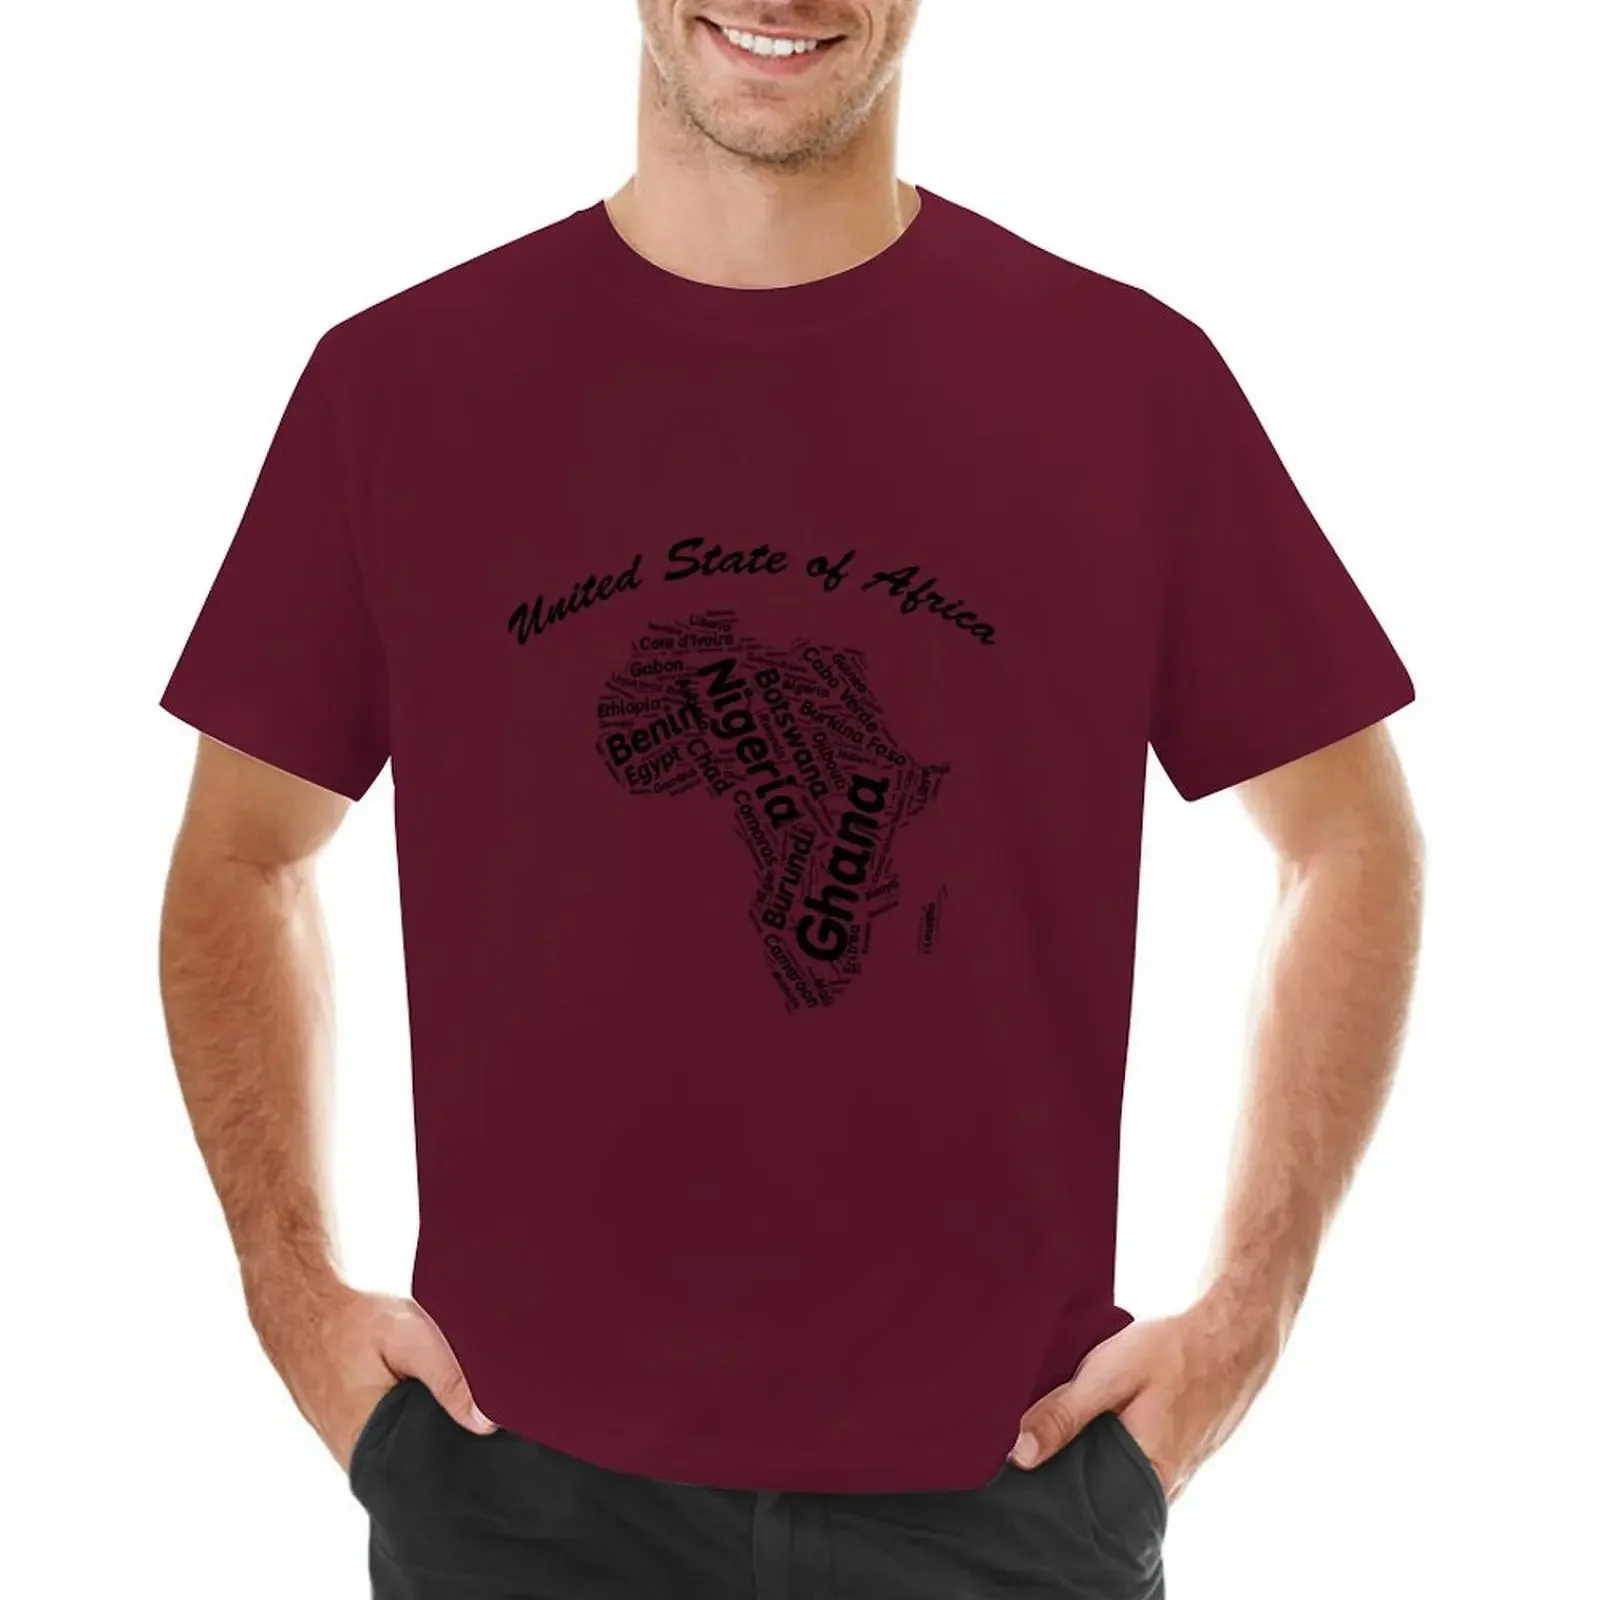 

United State of Africa T-shirt anime cute tops quick drying customs design your own heavyweight t shirts for men